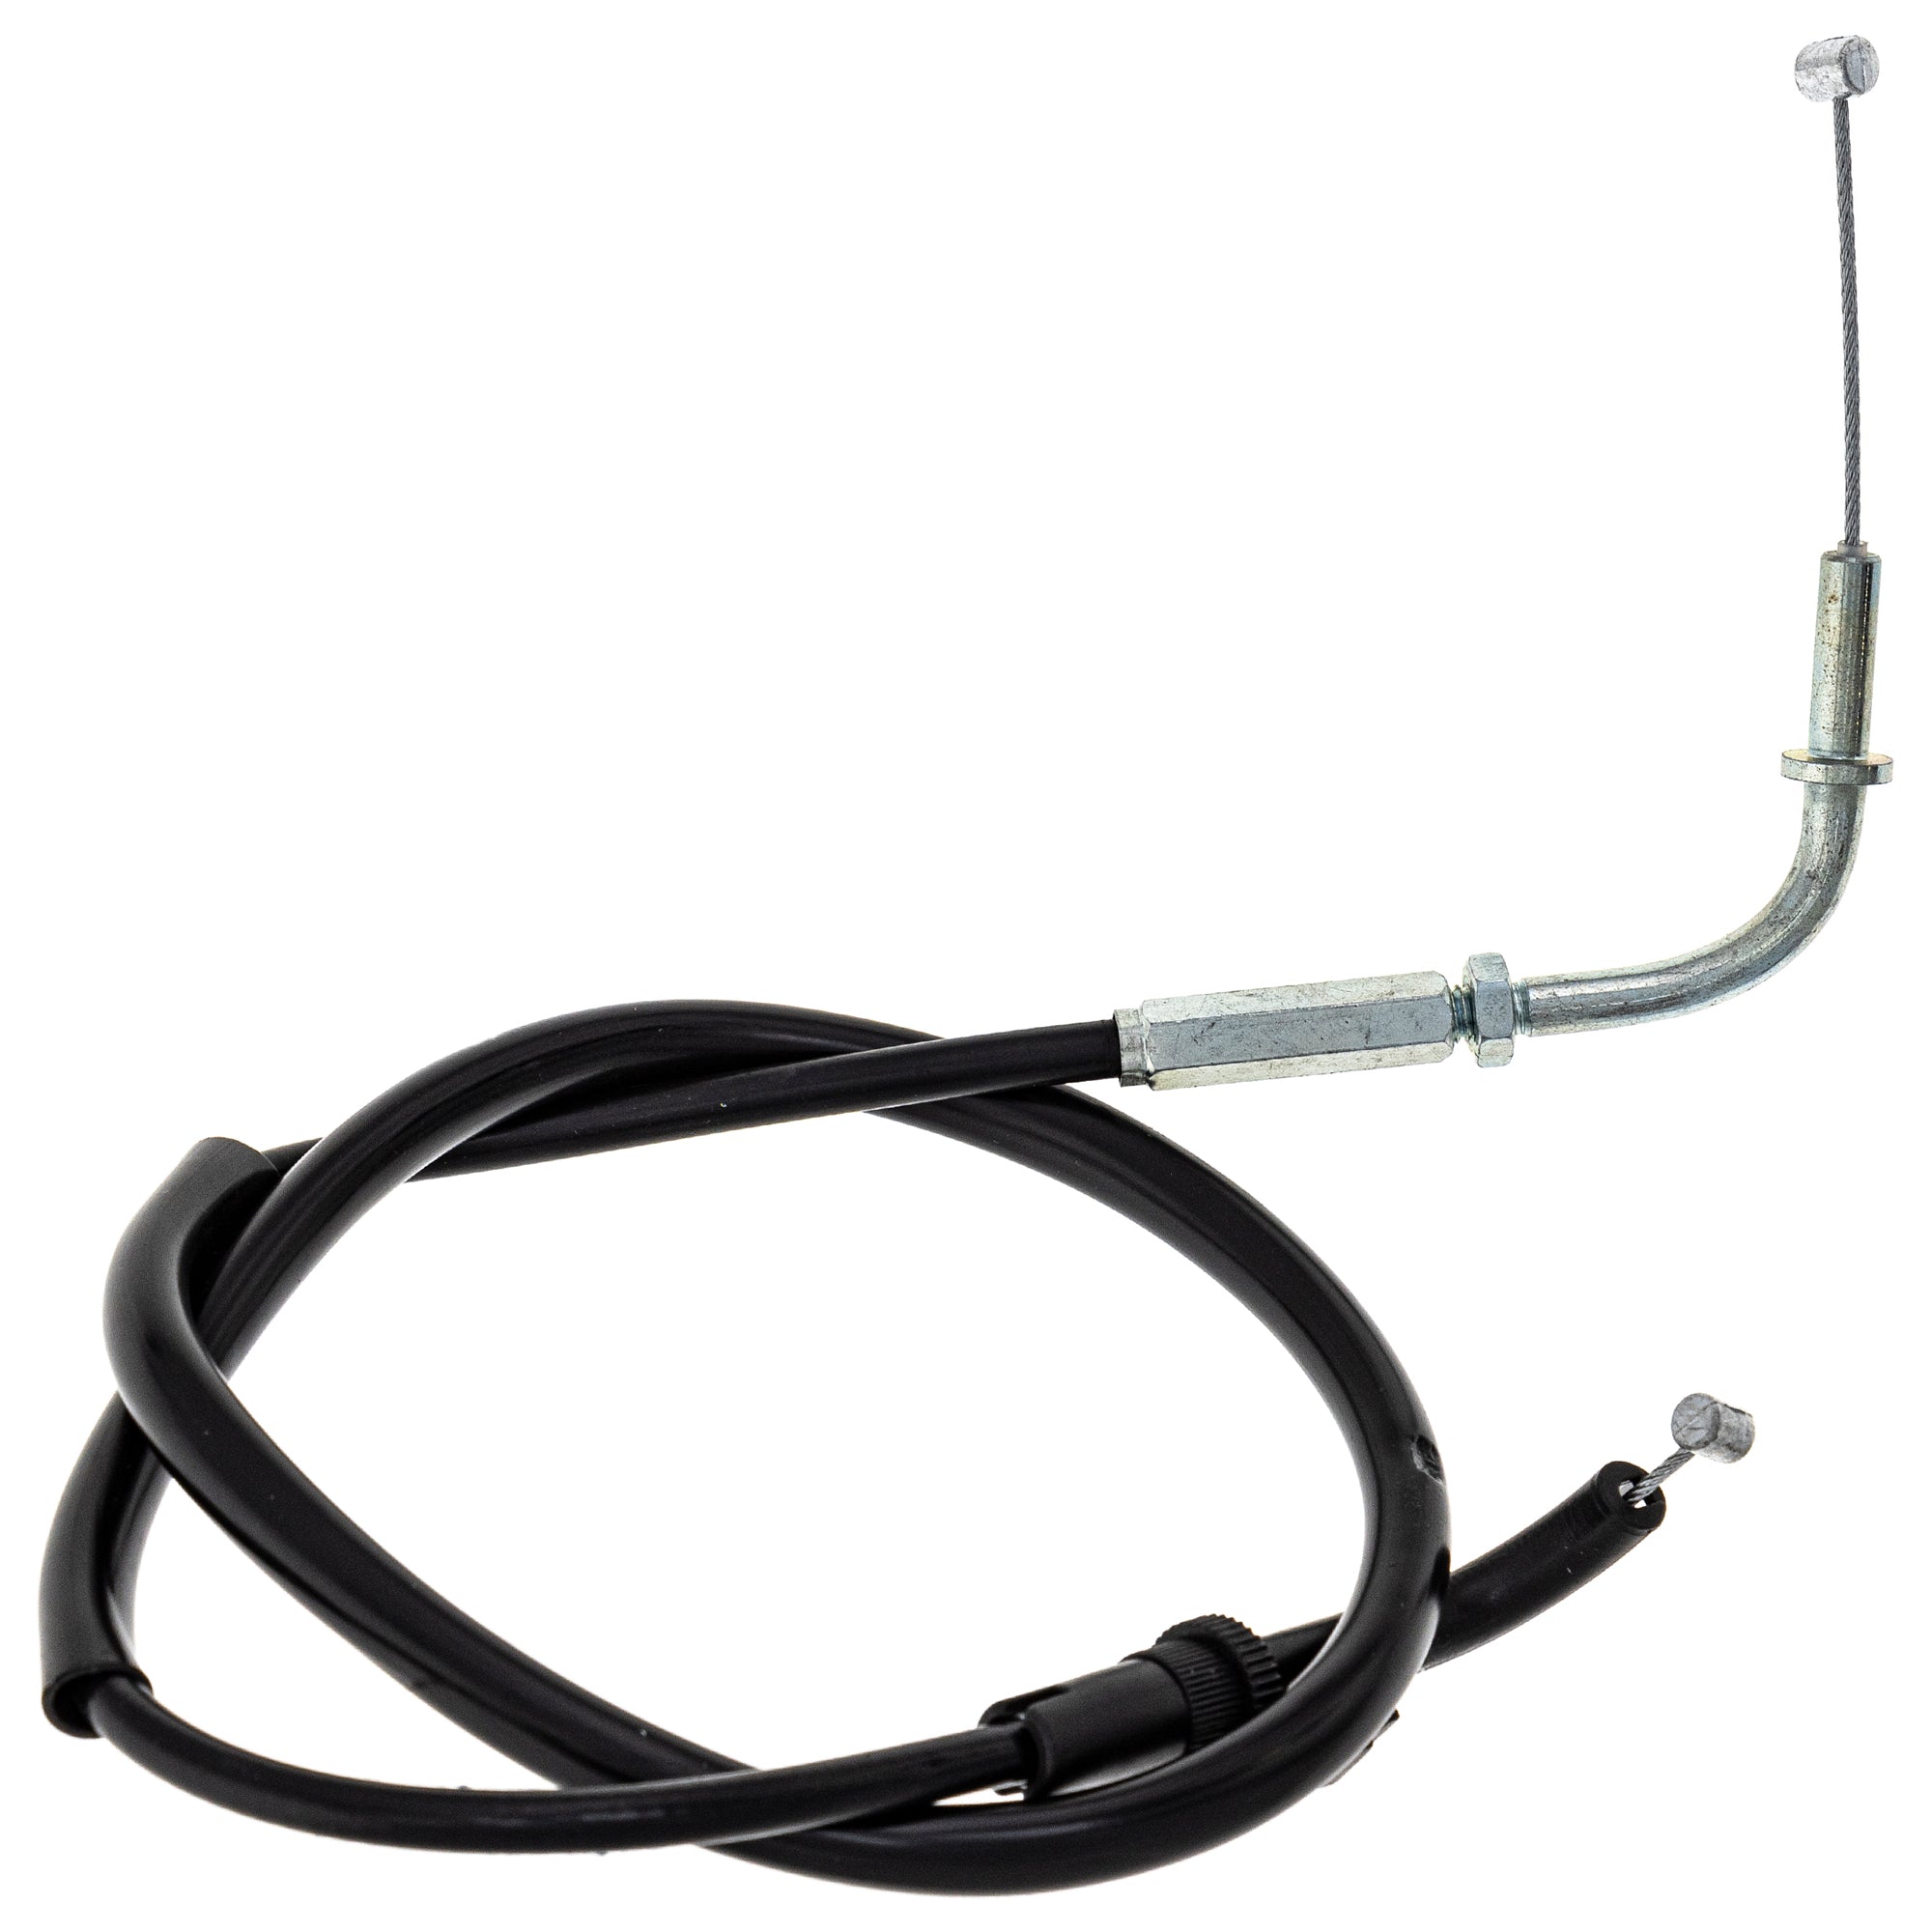 Throttle Cable For Kawasaki 54012-1501